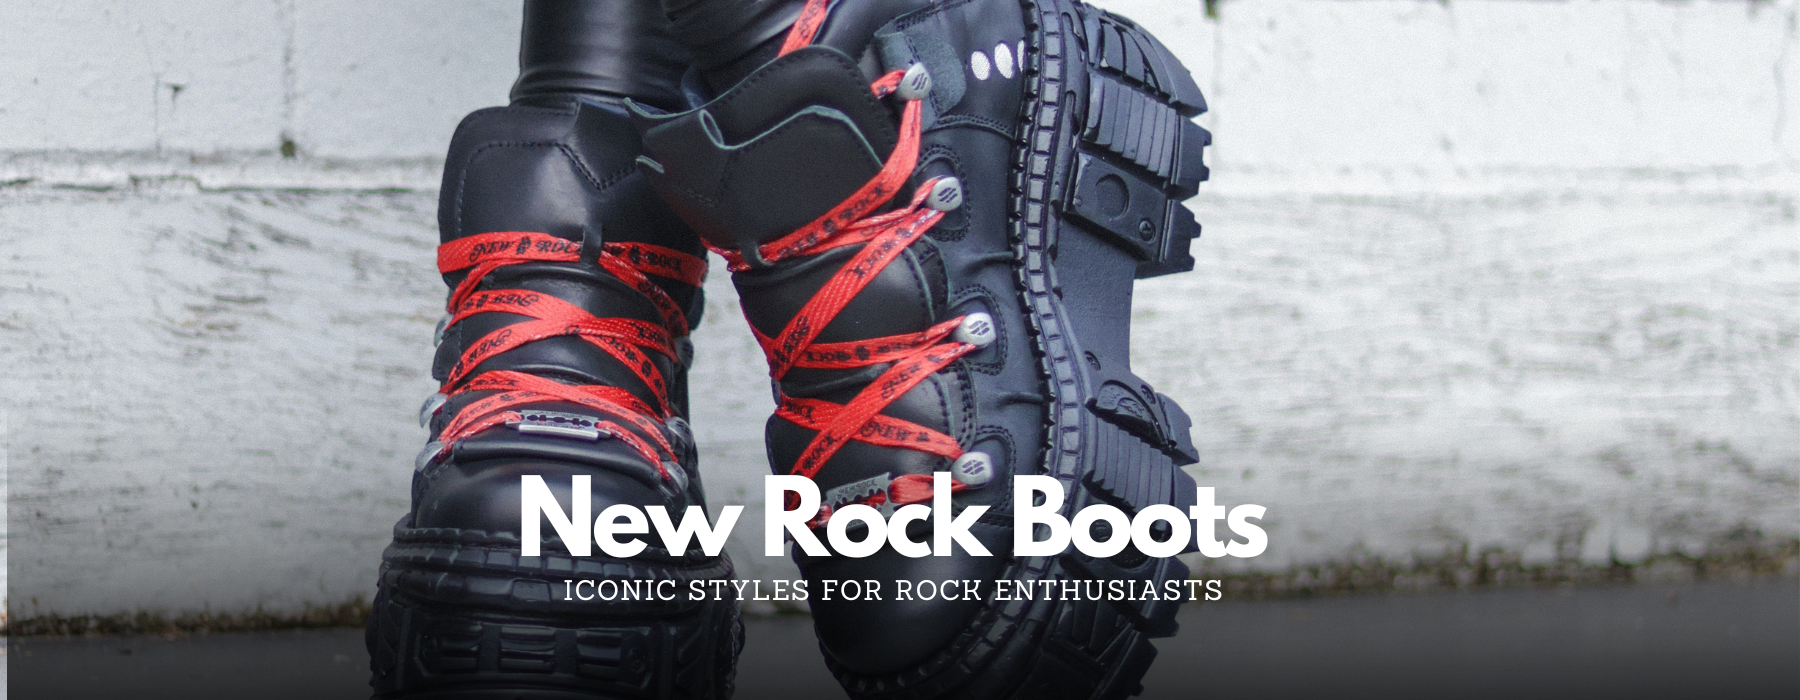 Iconic New Rock Boot Styles for Rock Enthusiasts - Upperclass Fashions 